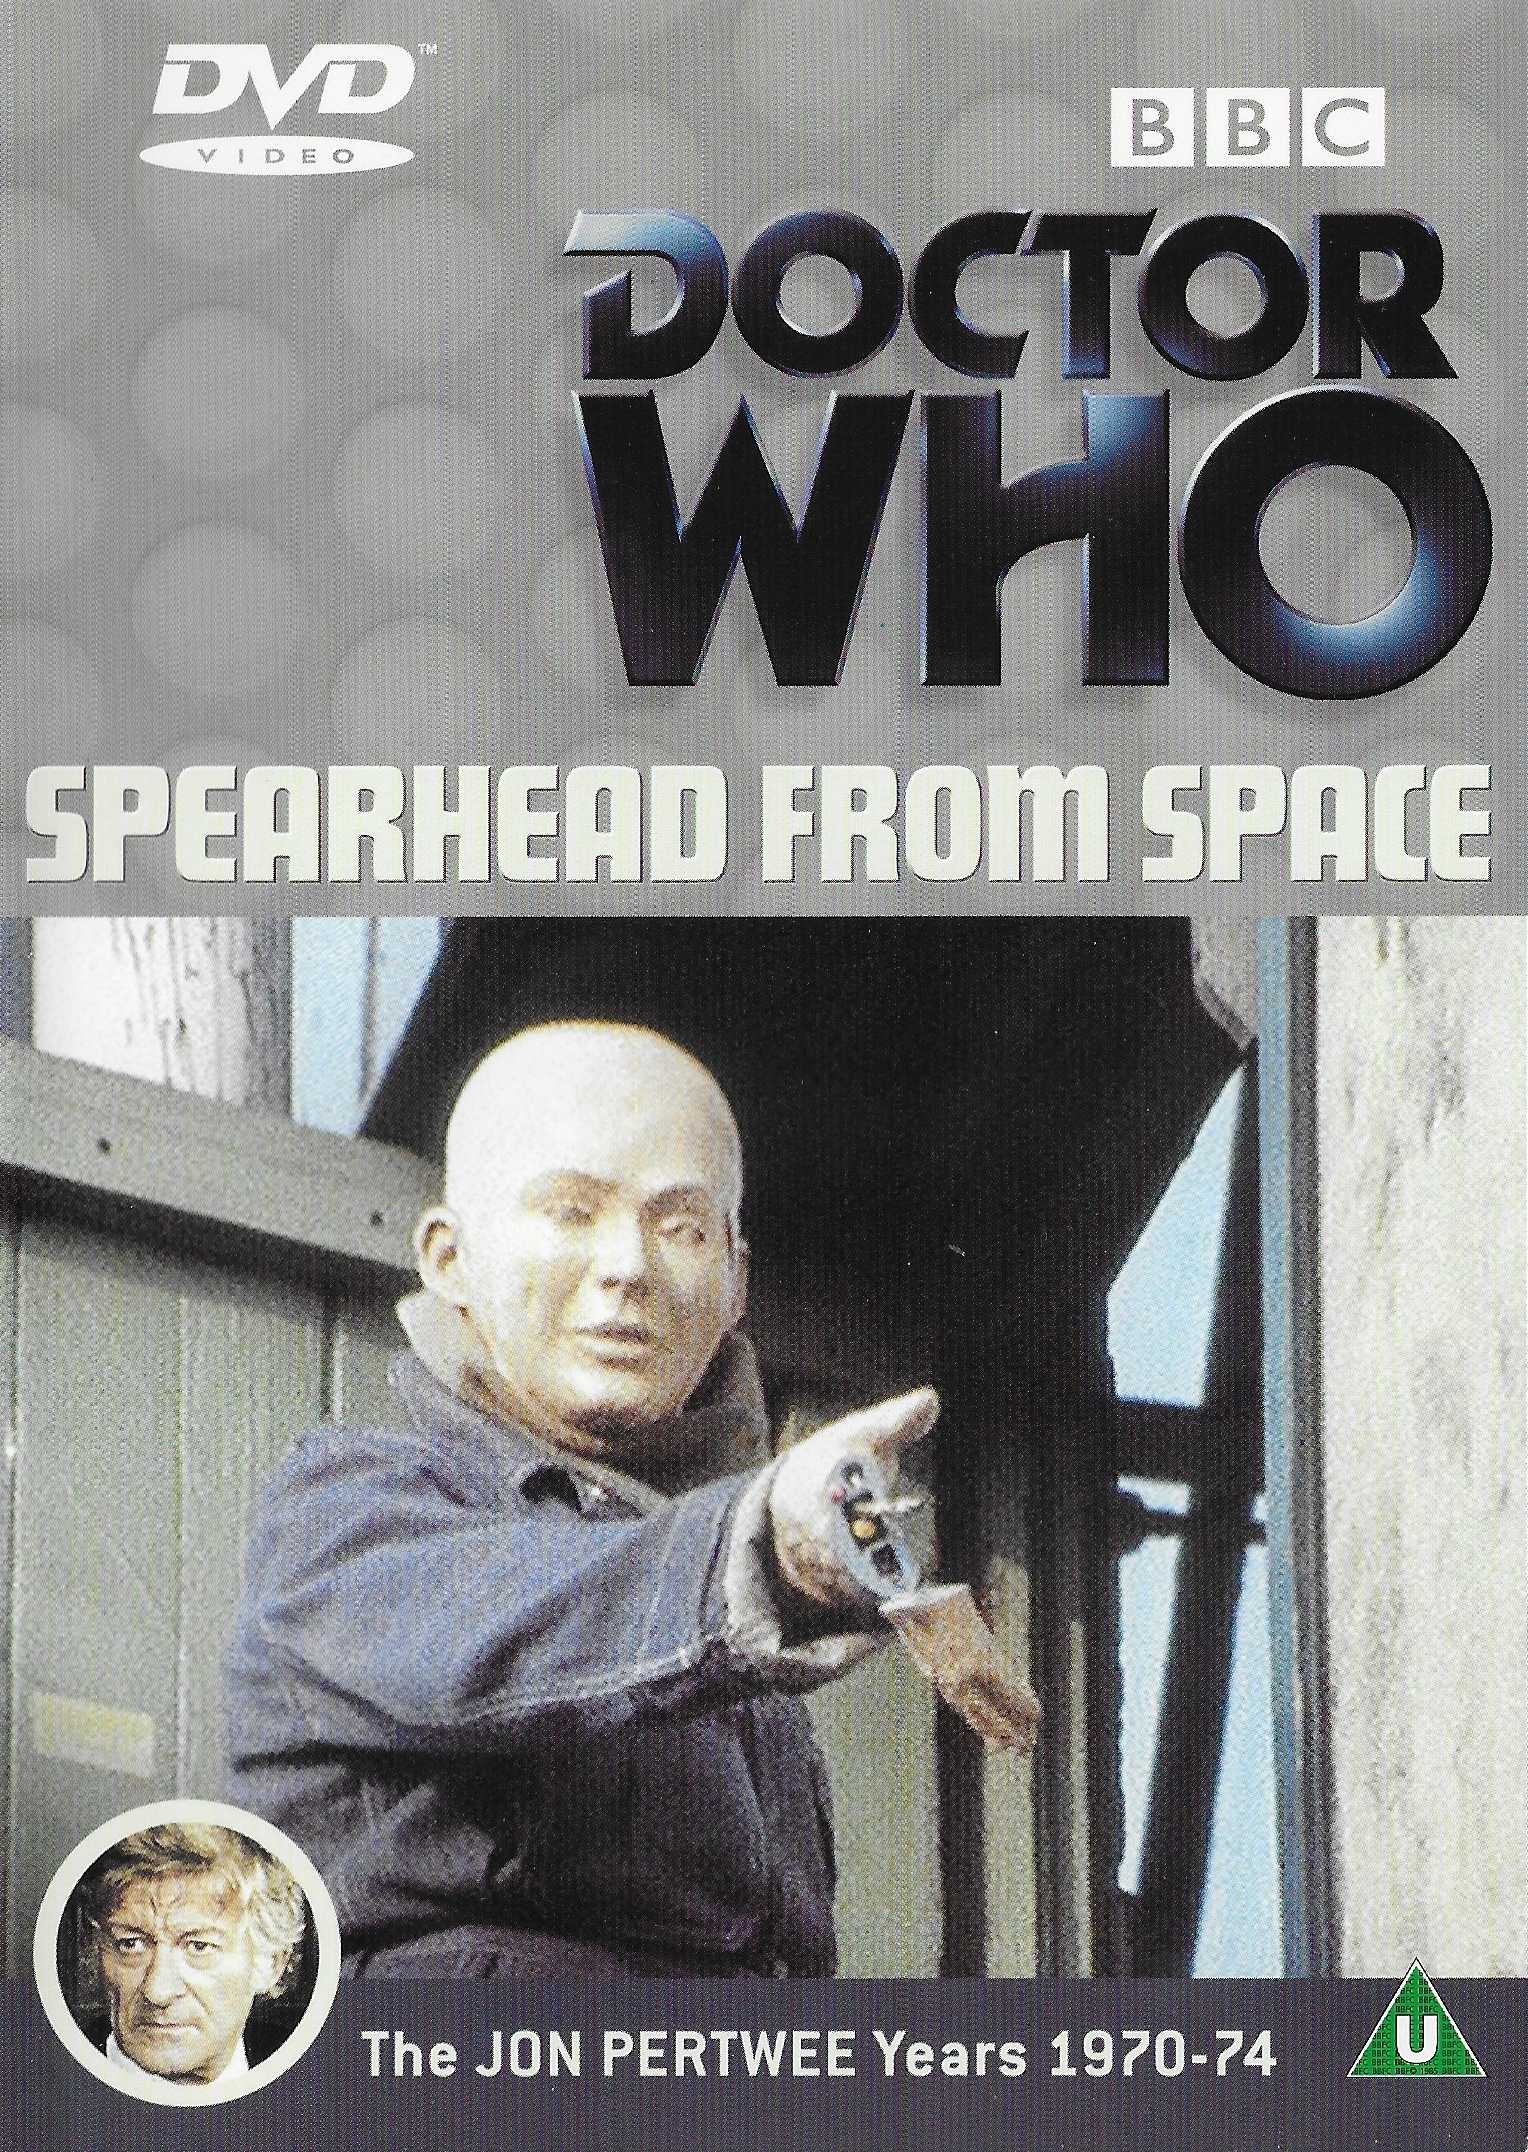 Picture of Doctor Who - Spearhead from space by artist Robert Holmes from the BBC dvds - Records and Tapes library